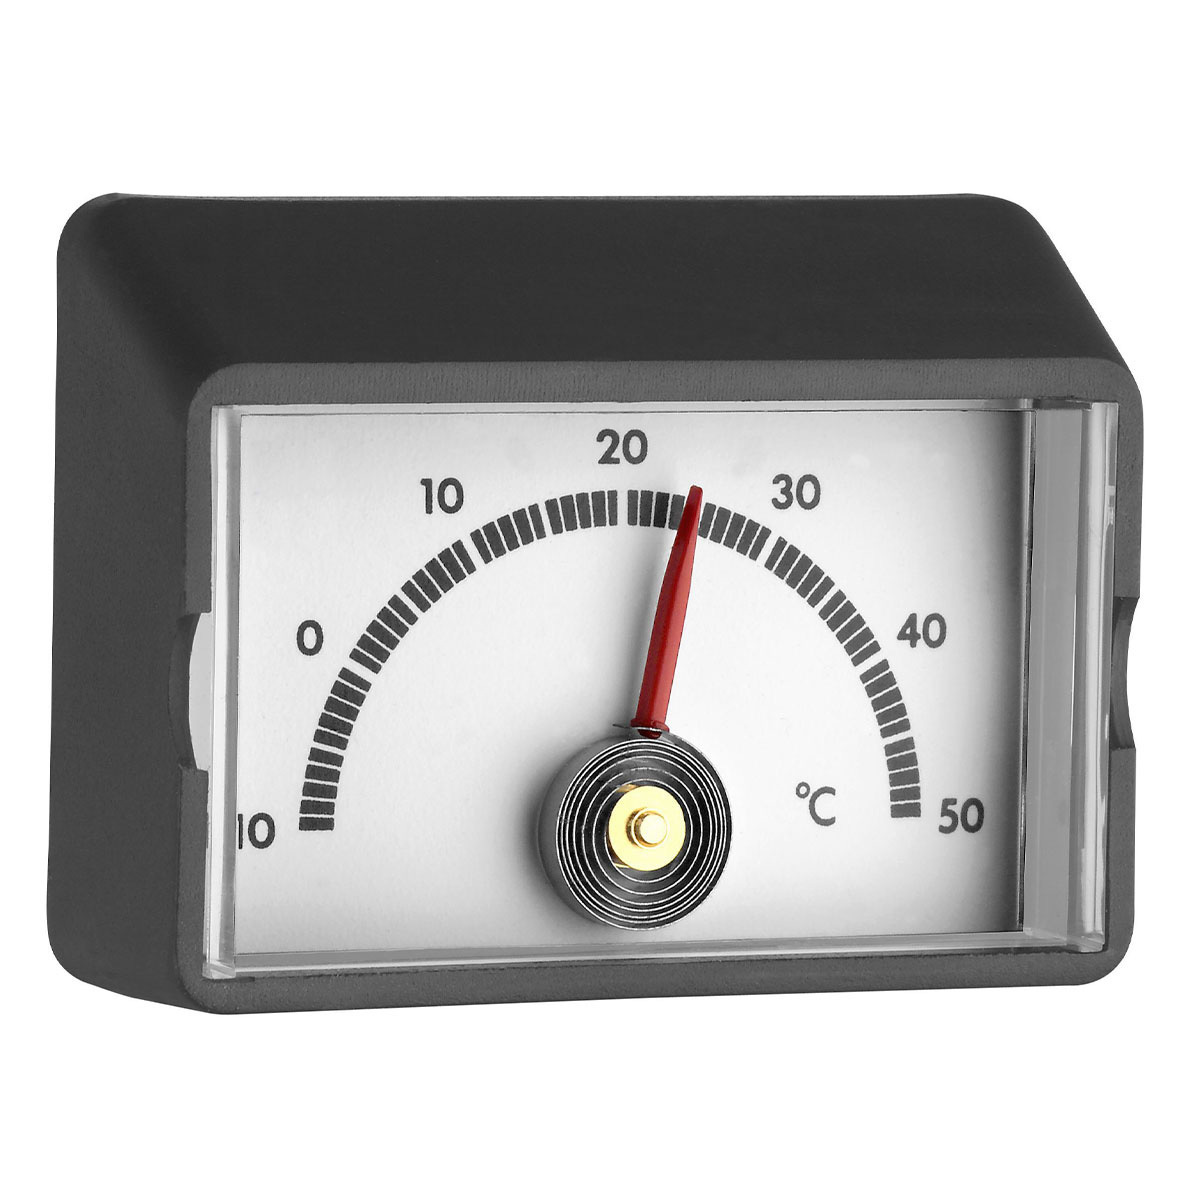 19-2010-analoges-thermometer-1200x1200px.jpg